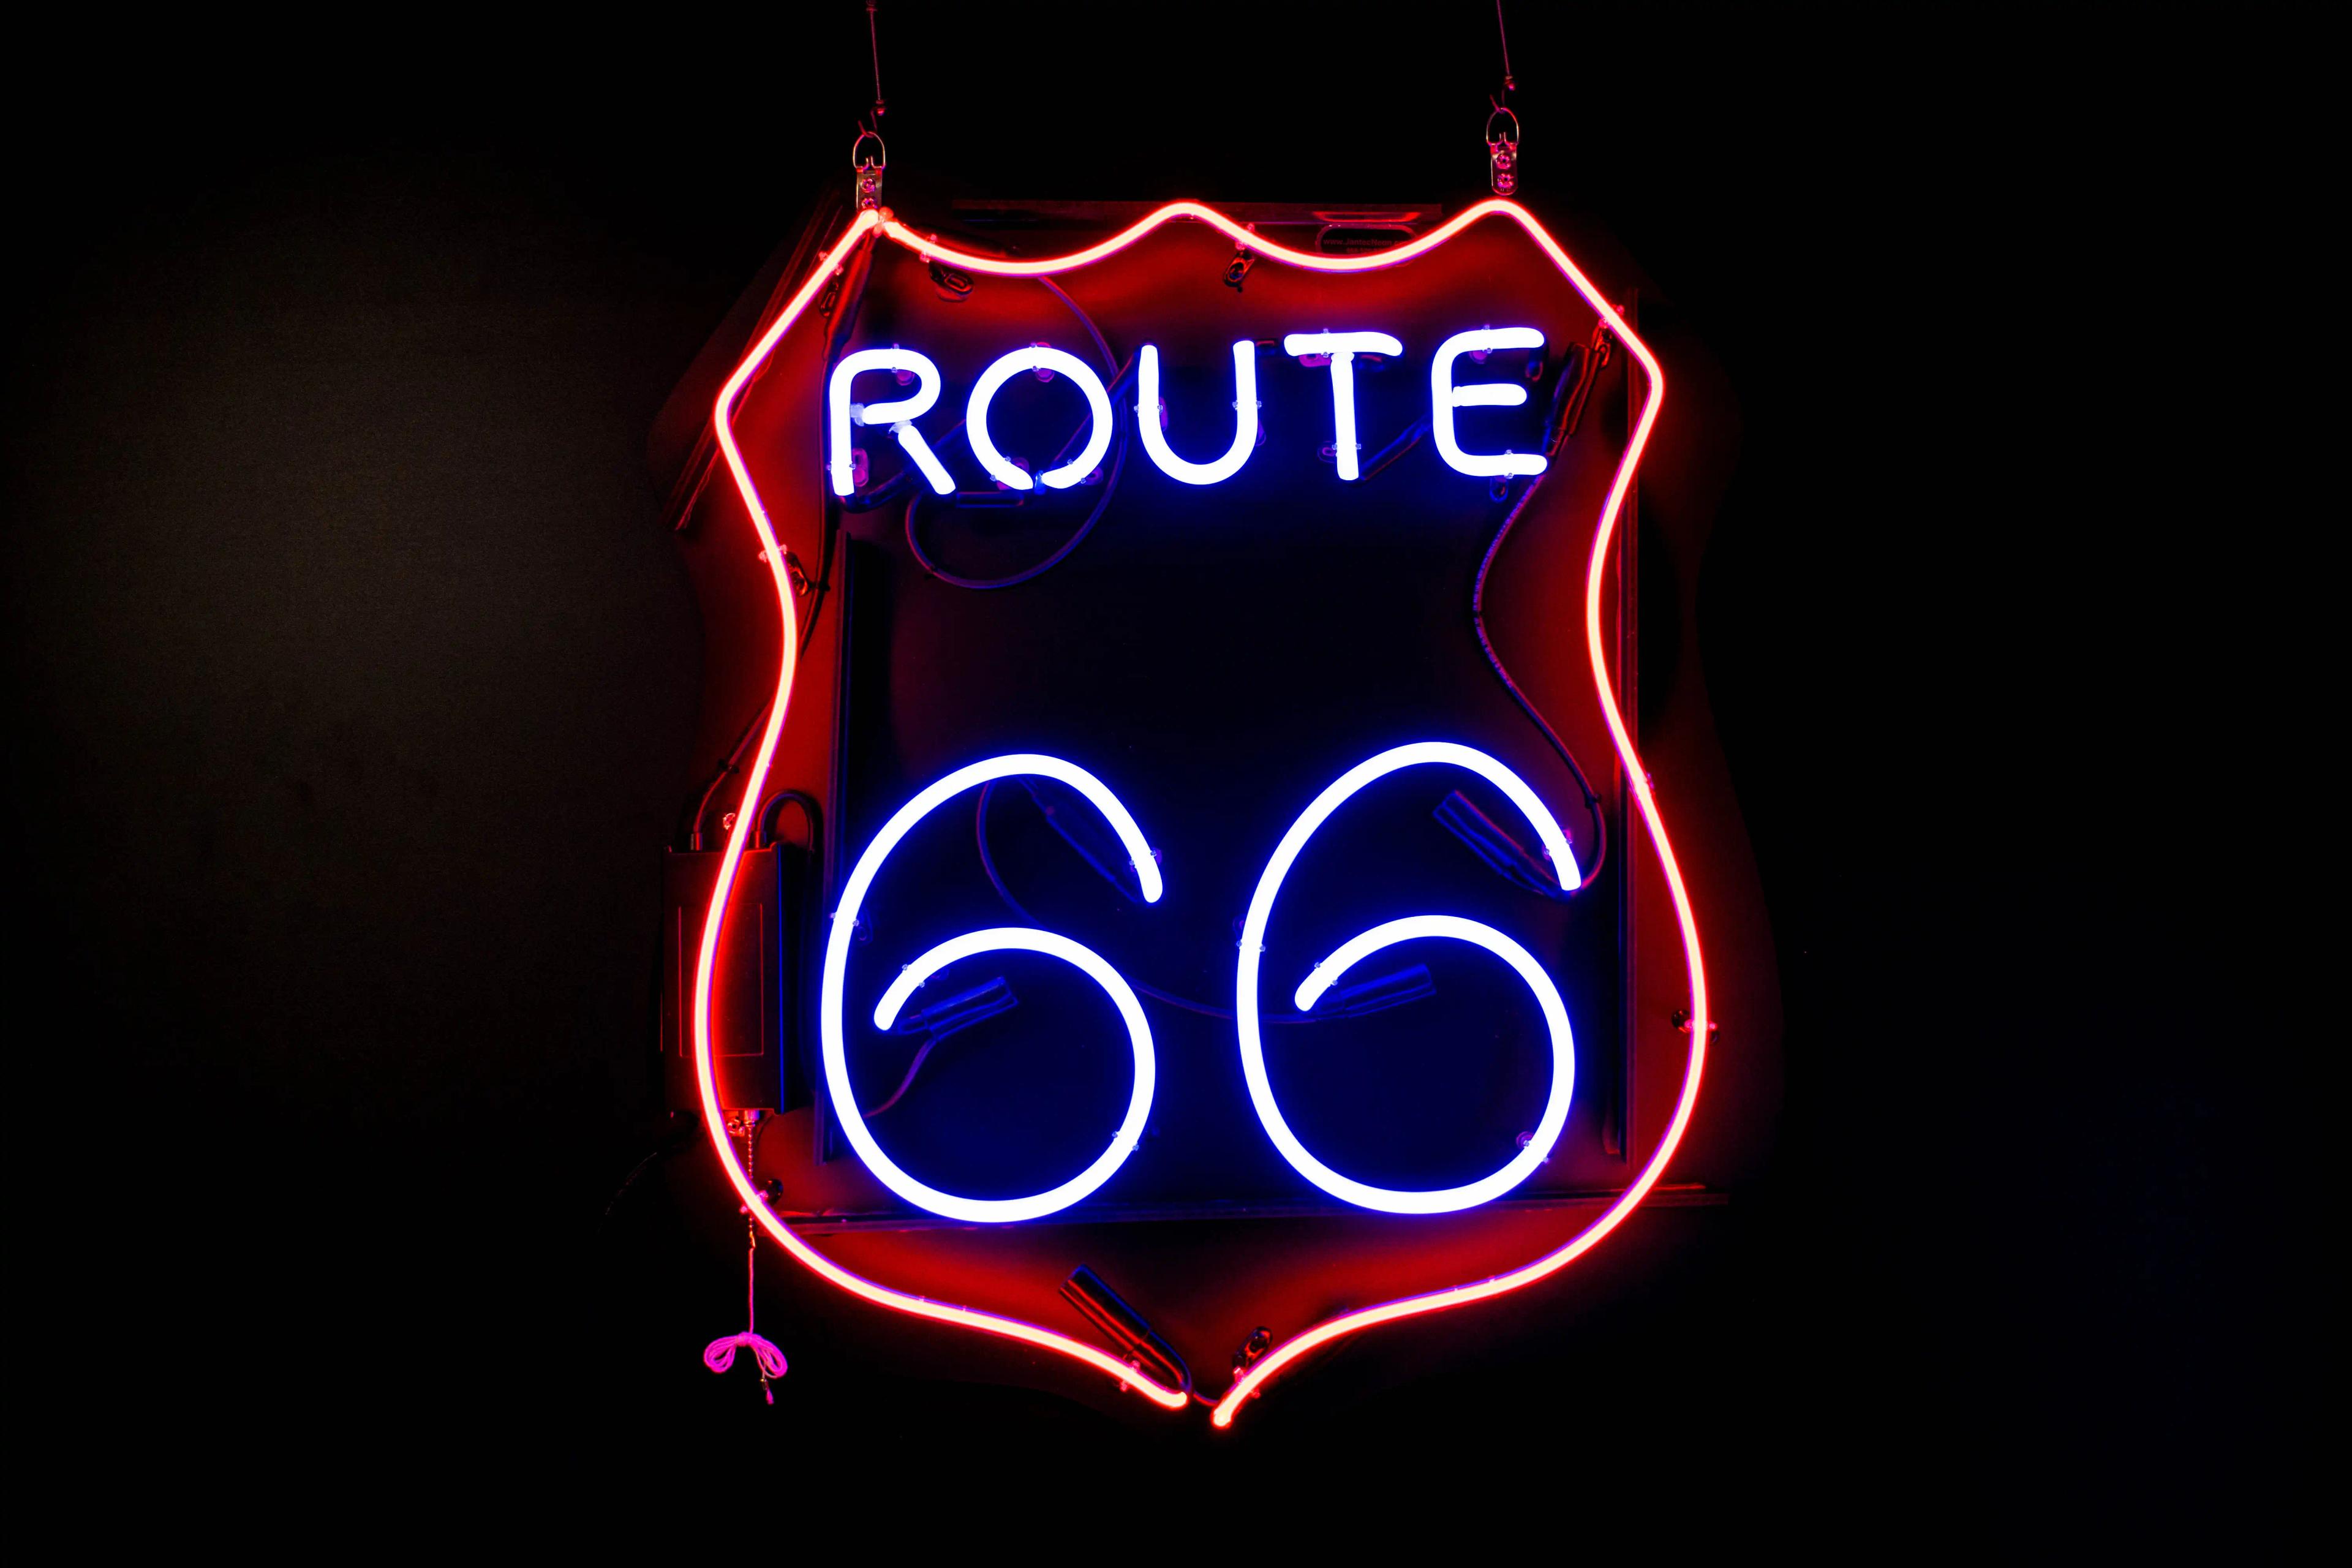 A neon sign in the style of a road sign that says route 66.